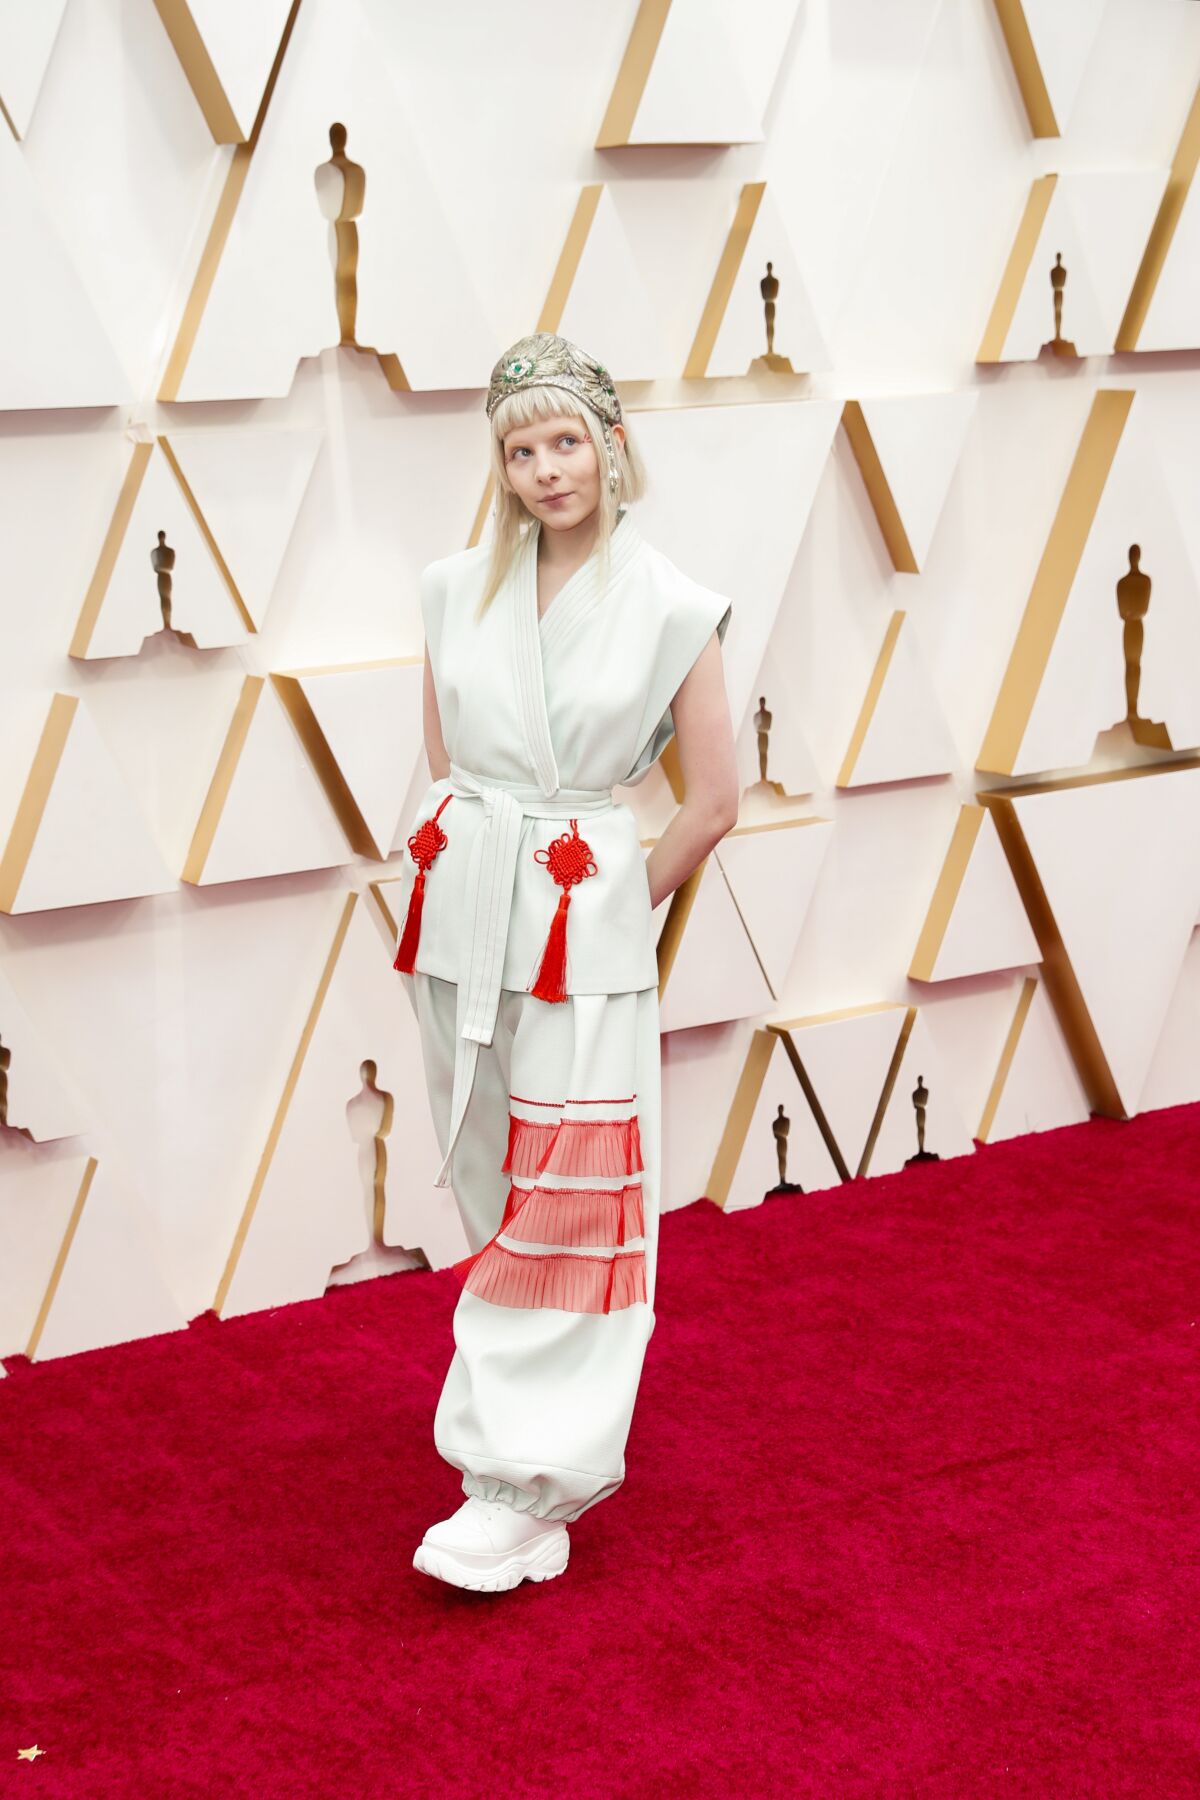 Aurora arriving at the 92nd Academy Awards.